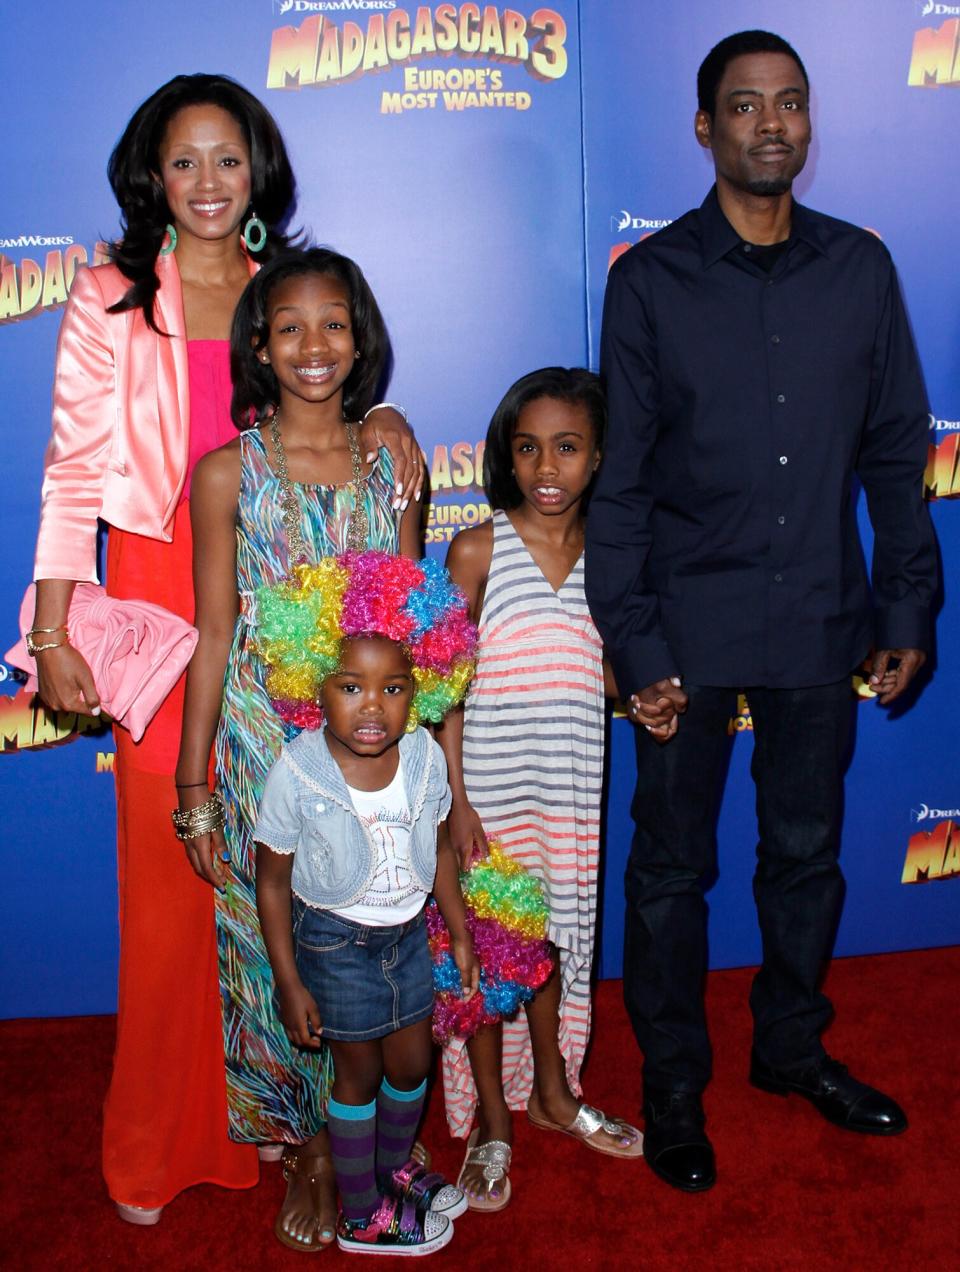 Malaak Compton-Rock, Lola Rock, Savannah Rock, Chris Rock and Tompi attend the "Madagascar 3: Europe's Most Wanted" New York Premier at Ziegfeld Theatre on June 7, 2012 in New York City